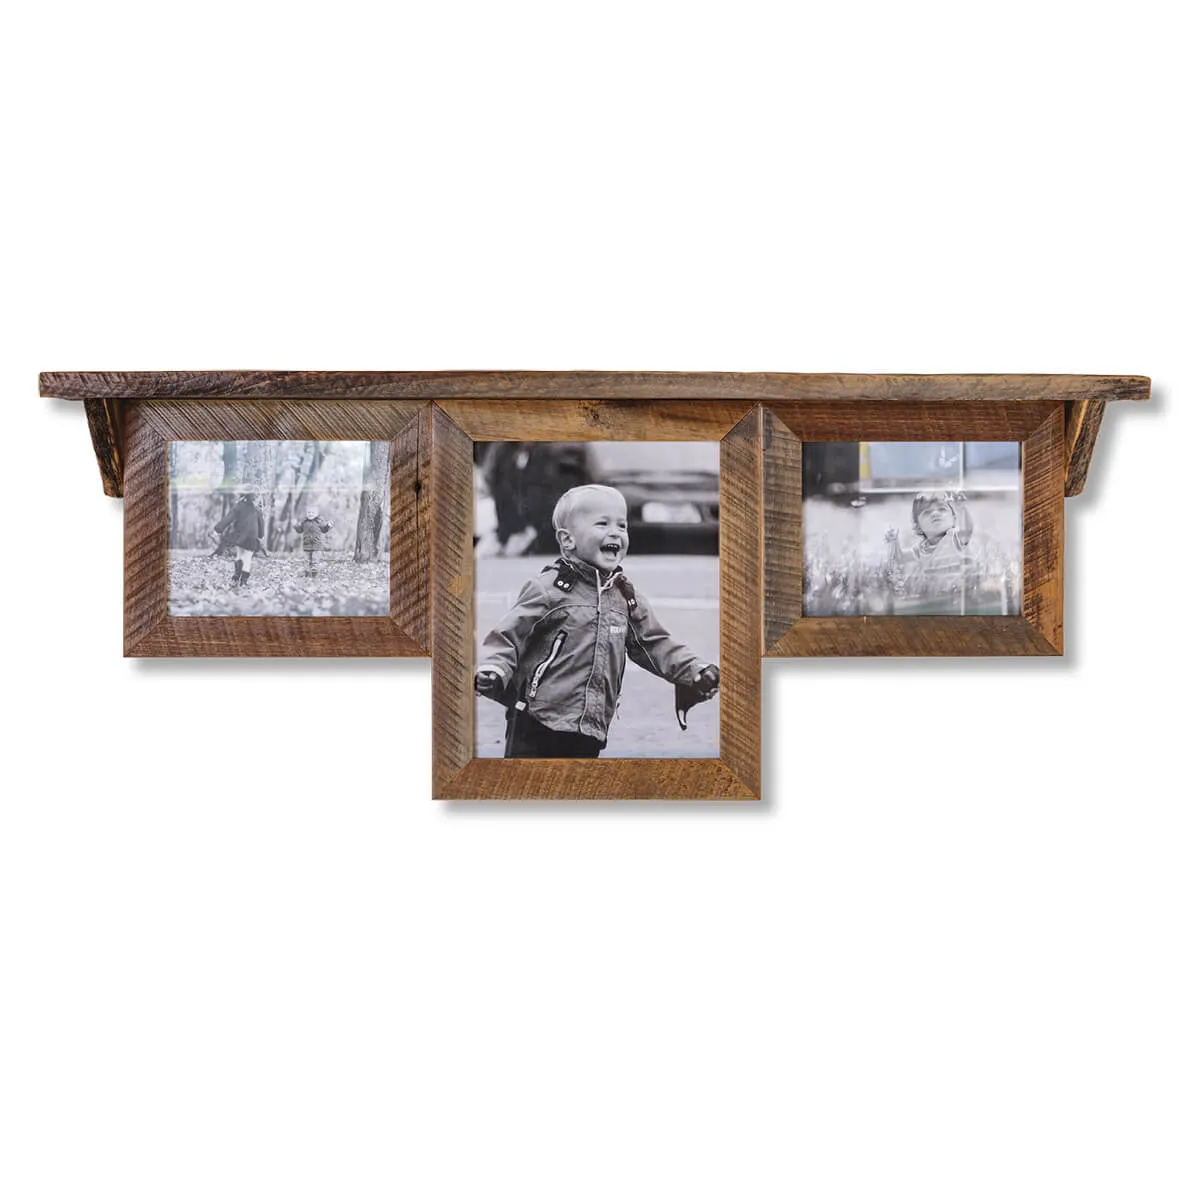 18 x 46 Wall Shelf with Picture Frames